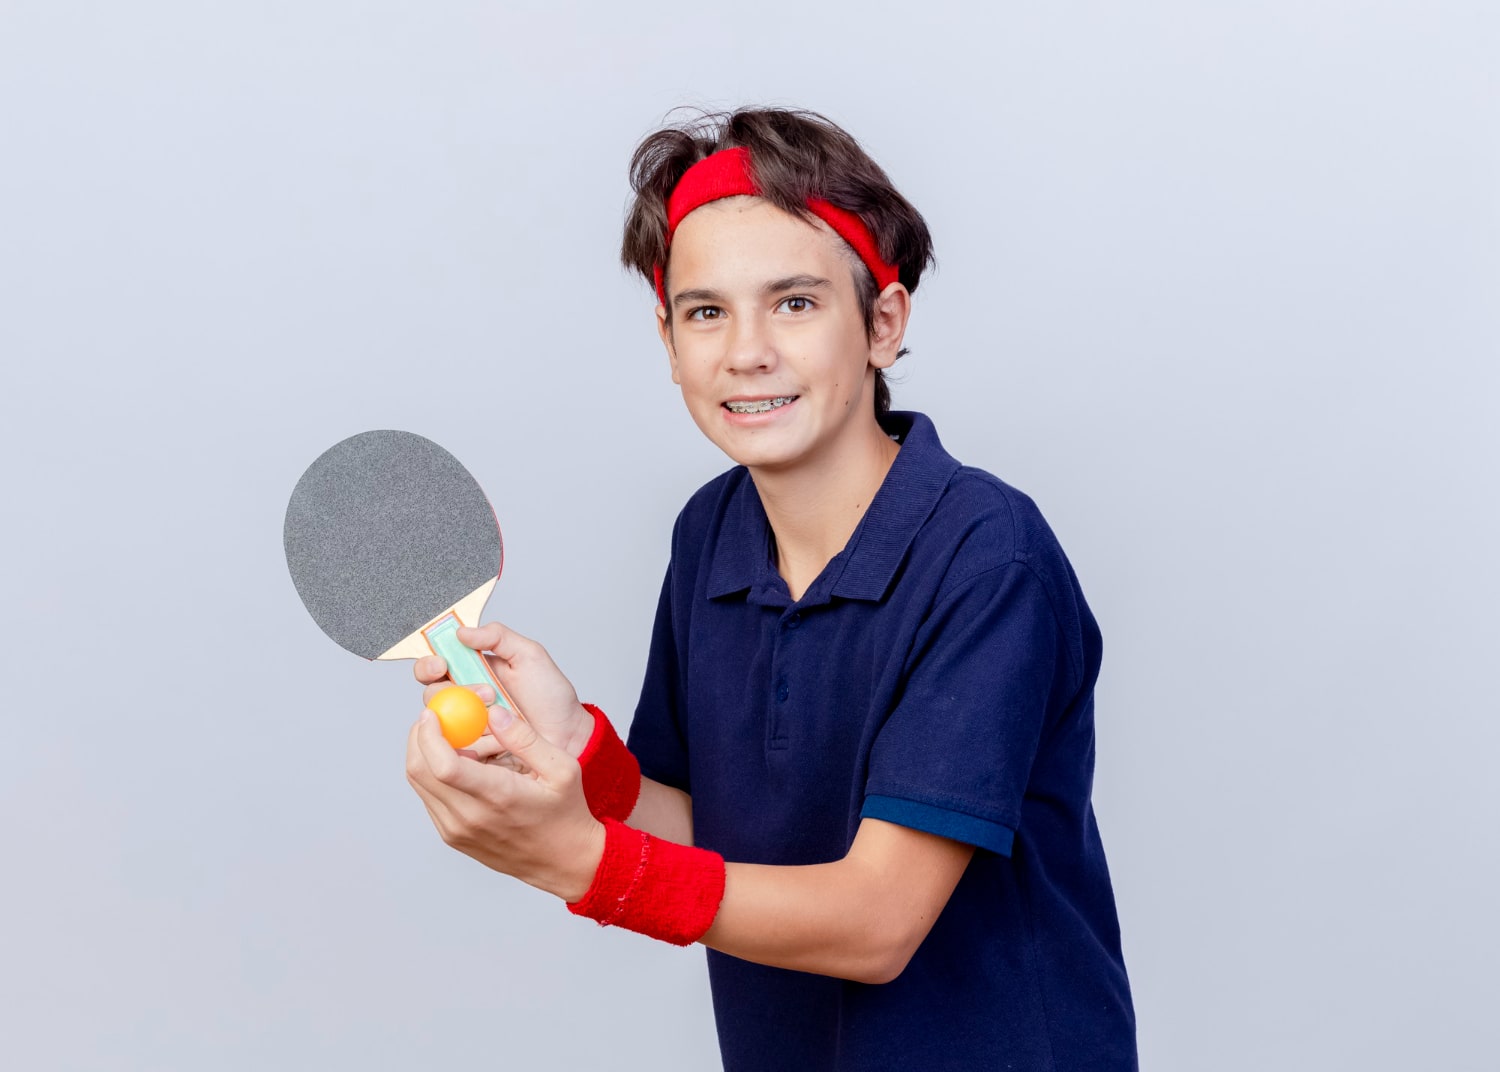 smiling young sporty boy wearing headband wristbands with dental braces holding ping pong racket ball questioning can i play sports with braces